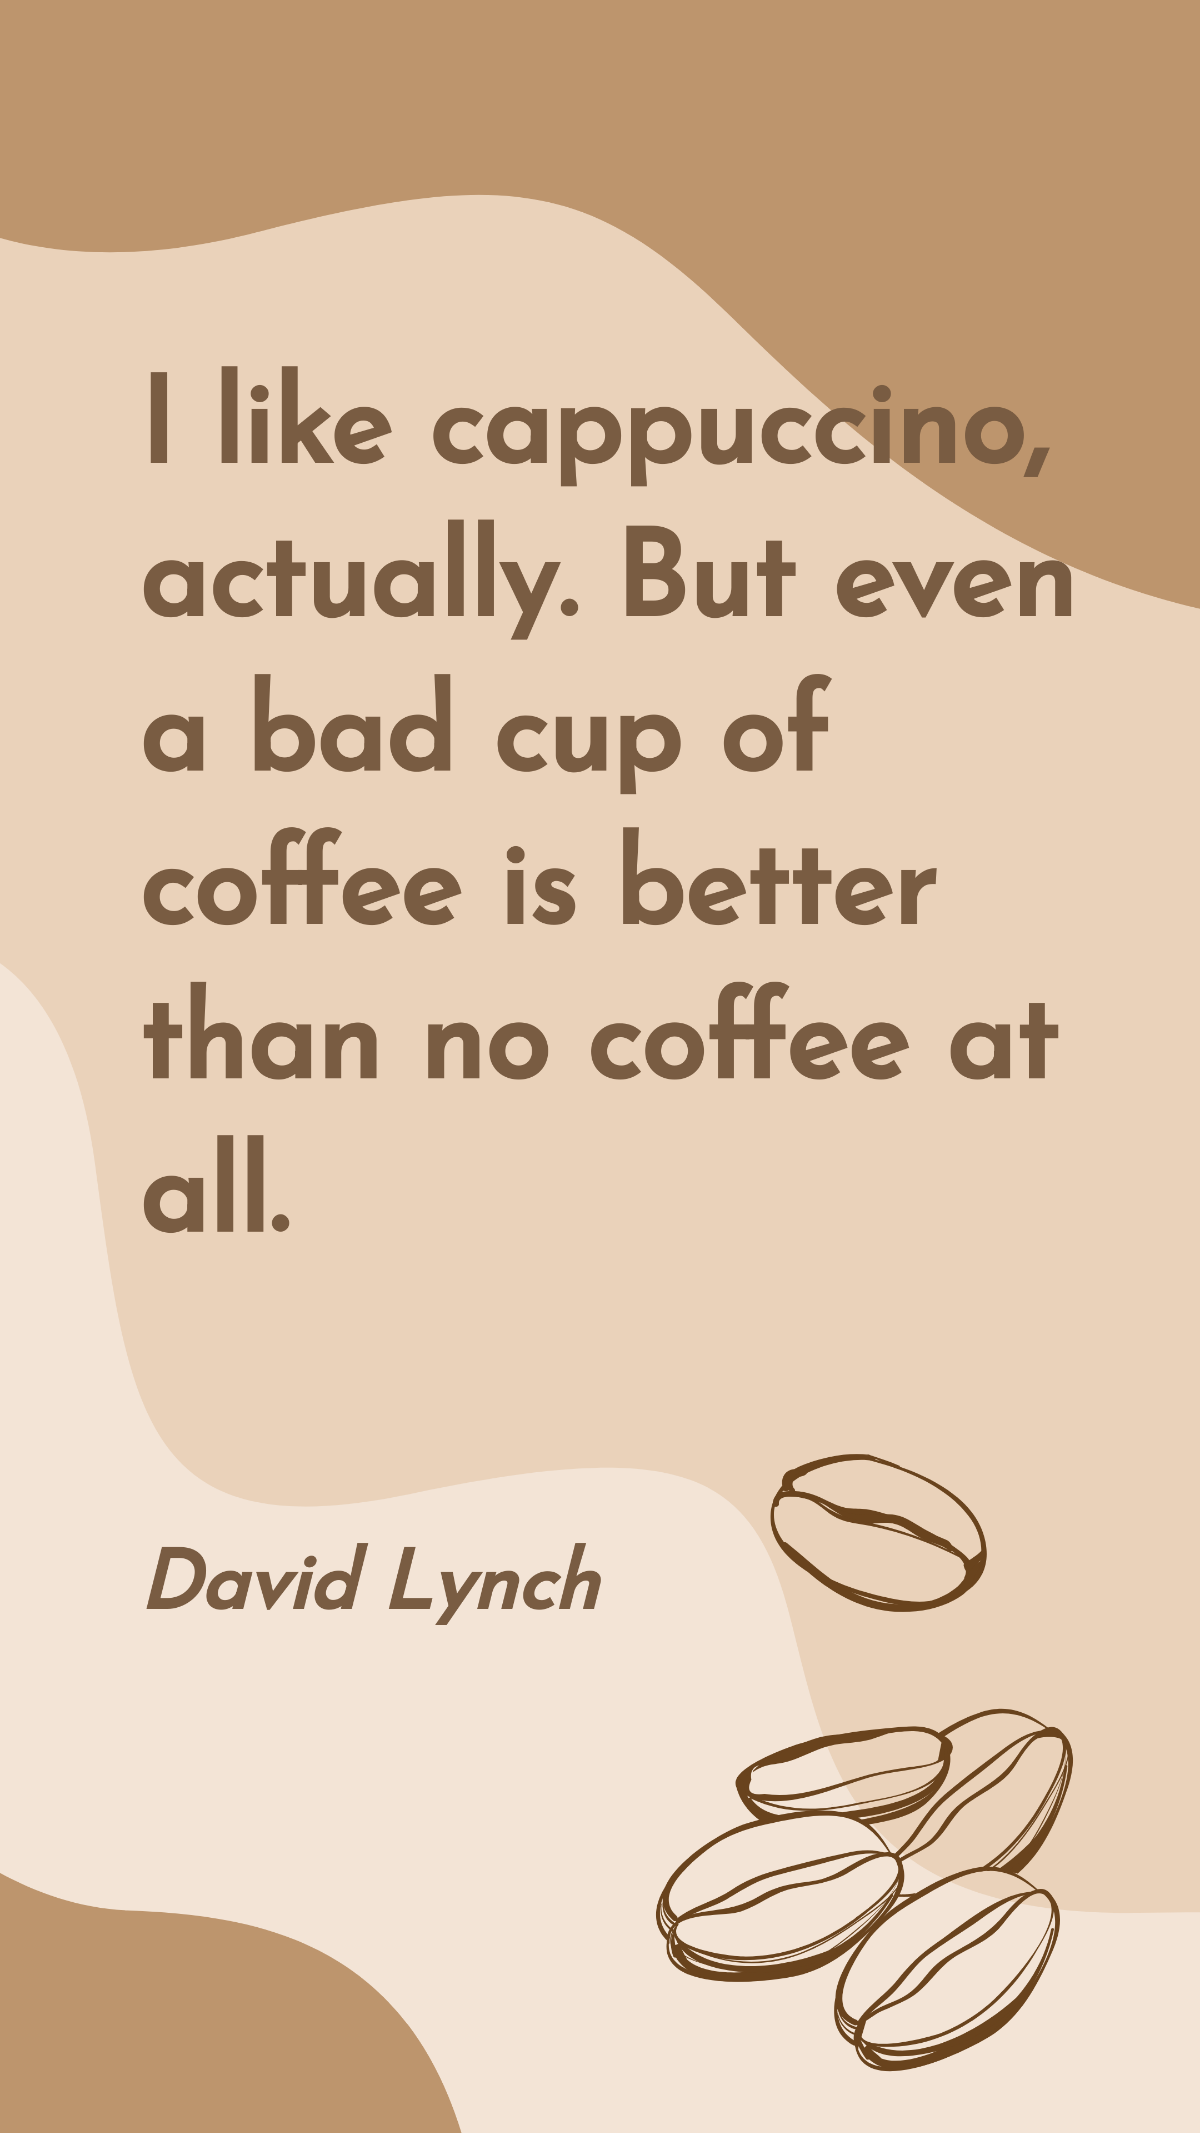 David Lynch - I like cappuccino, actually. But even a bad cup of coffee is better than no coffee at all. Template